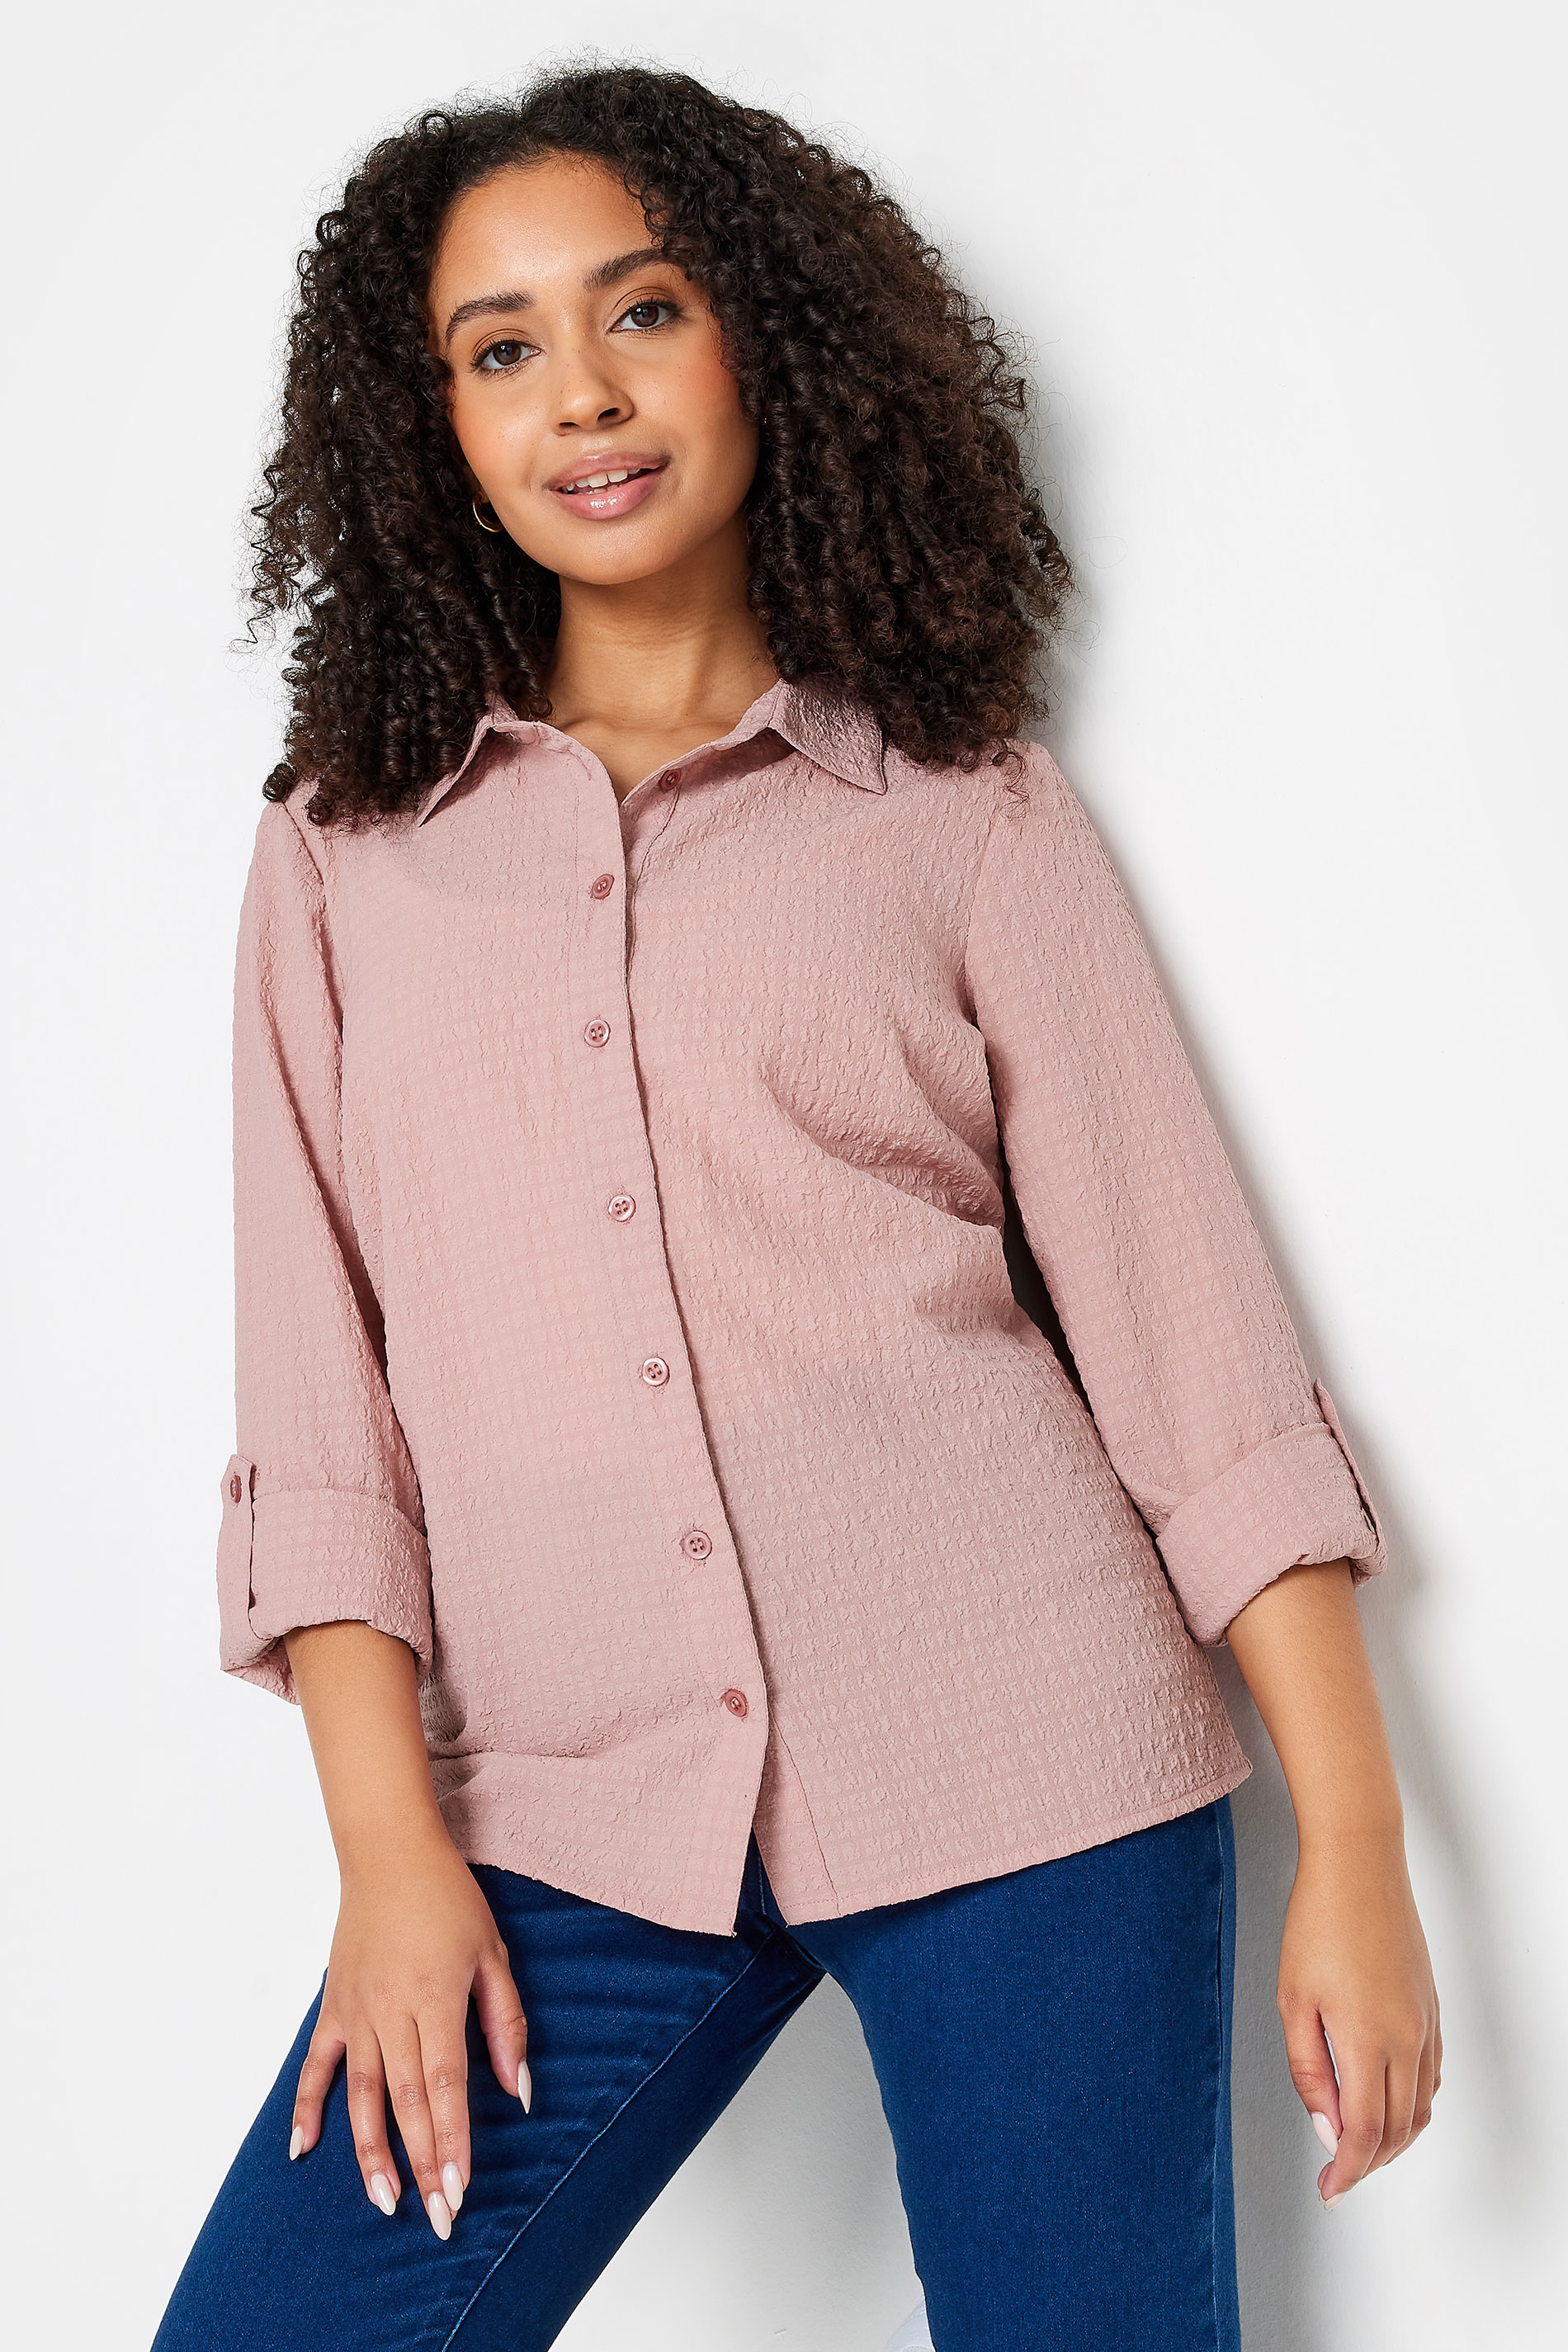 M&Co Petite Pink Textured Tab Sleeve Shirt | M&Co 1